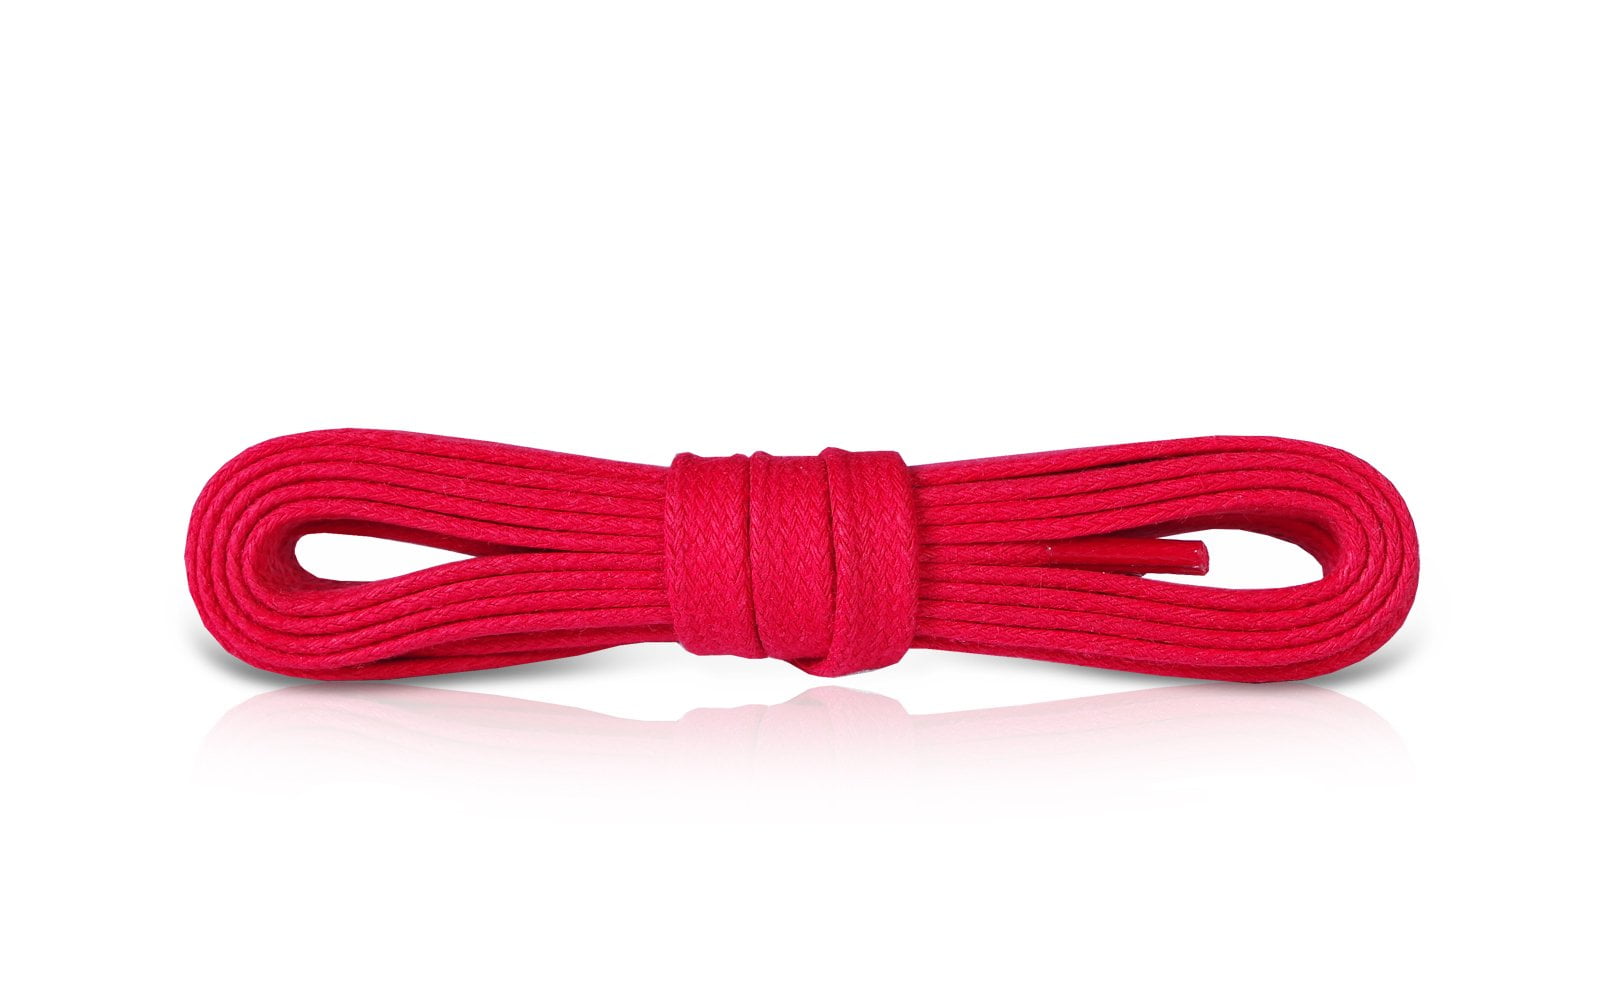 Red Buy 2 get 1 free New 5mm Cord Wax Shoe Boot laces 